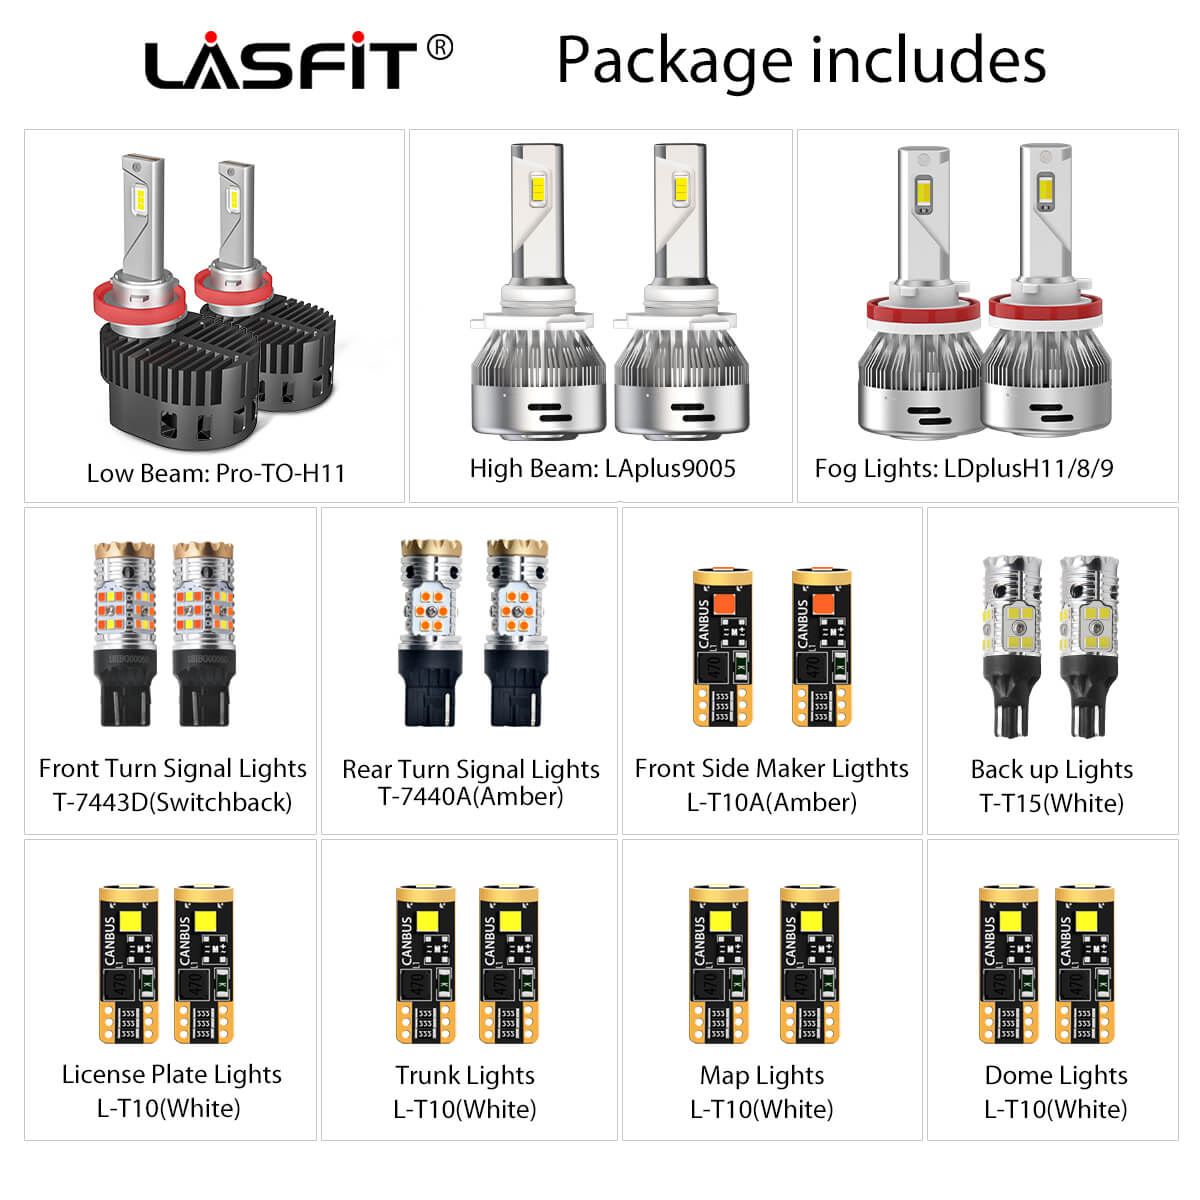 Lasfit White/Yellow Switchback 7443 7444 7444na Canbus Ready Anti Hyper Flash Mode Switchback LED Front Turn Signal Light Bulb Plug Play Standard